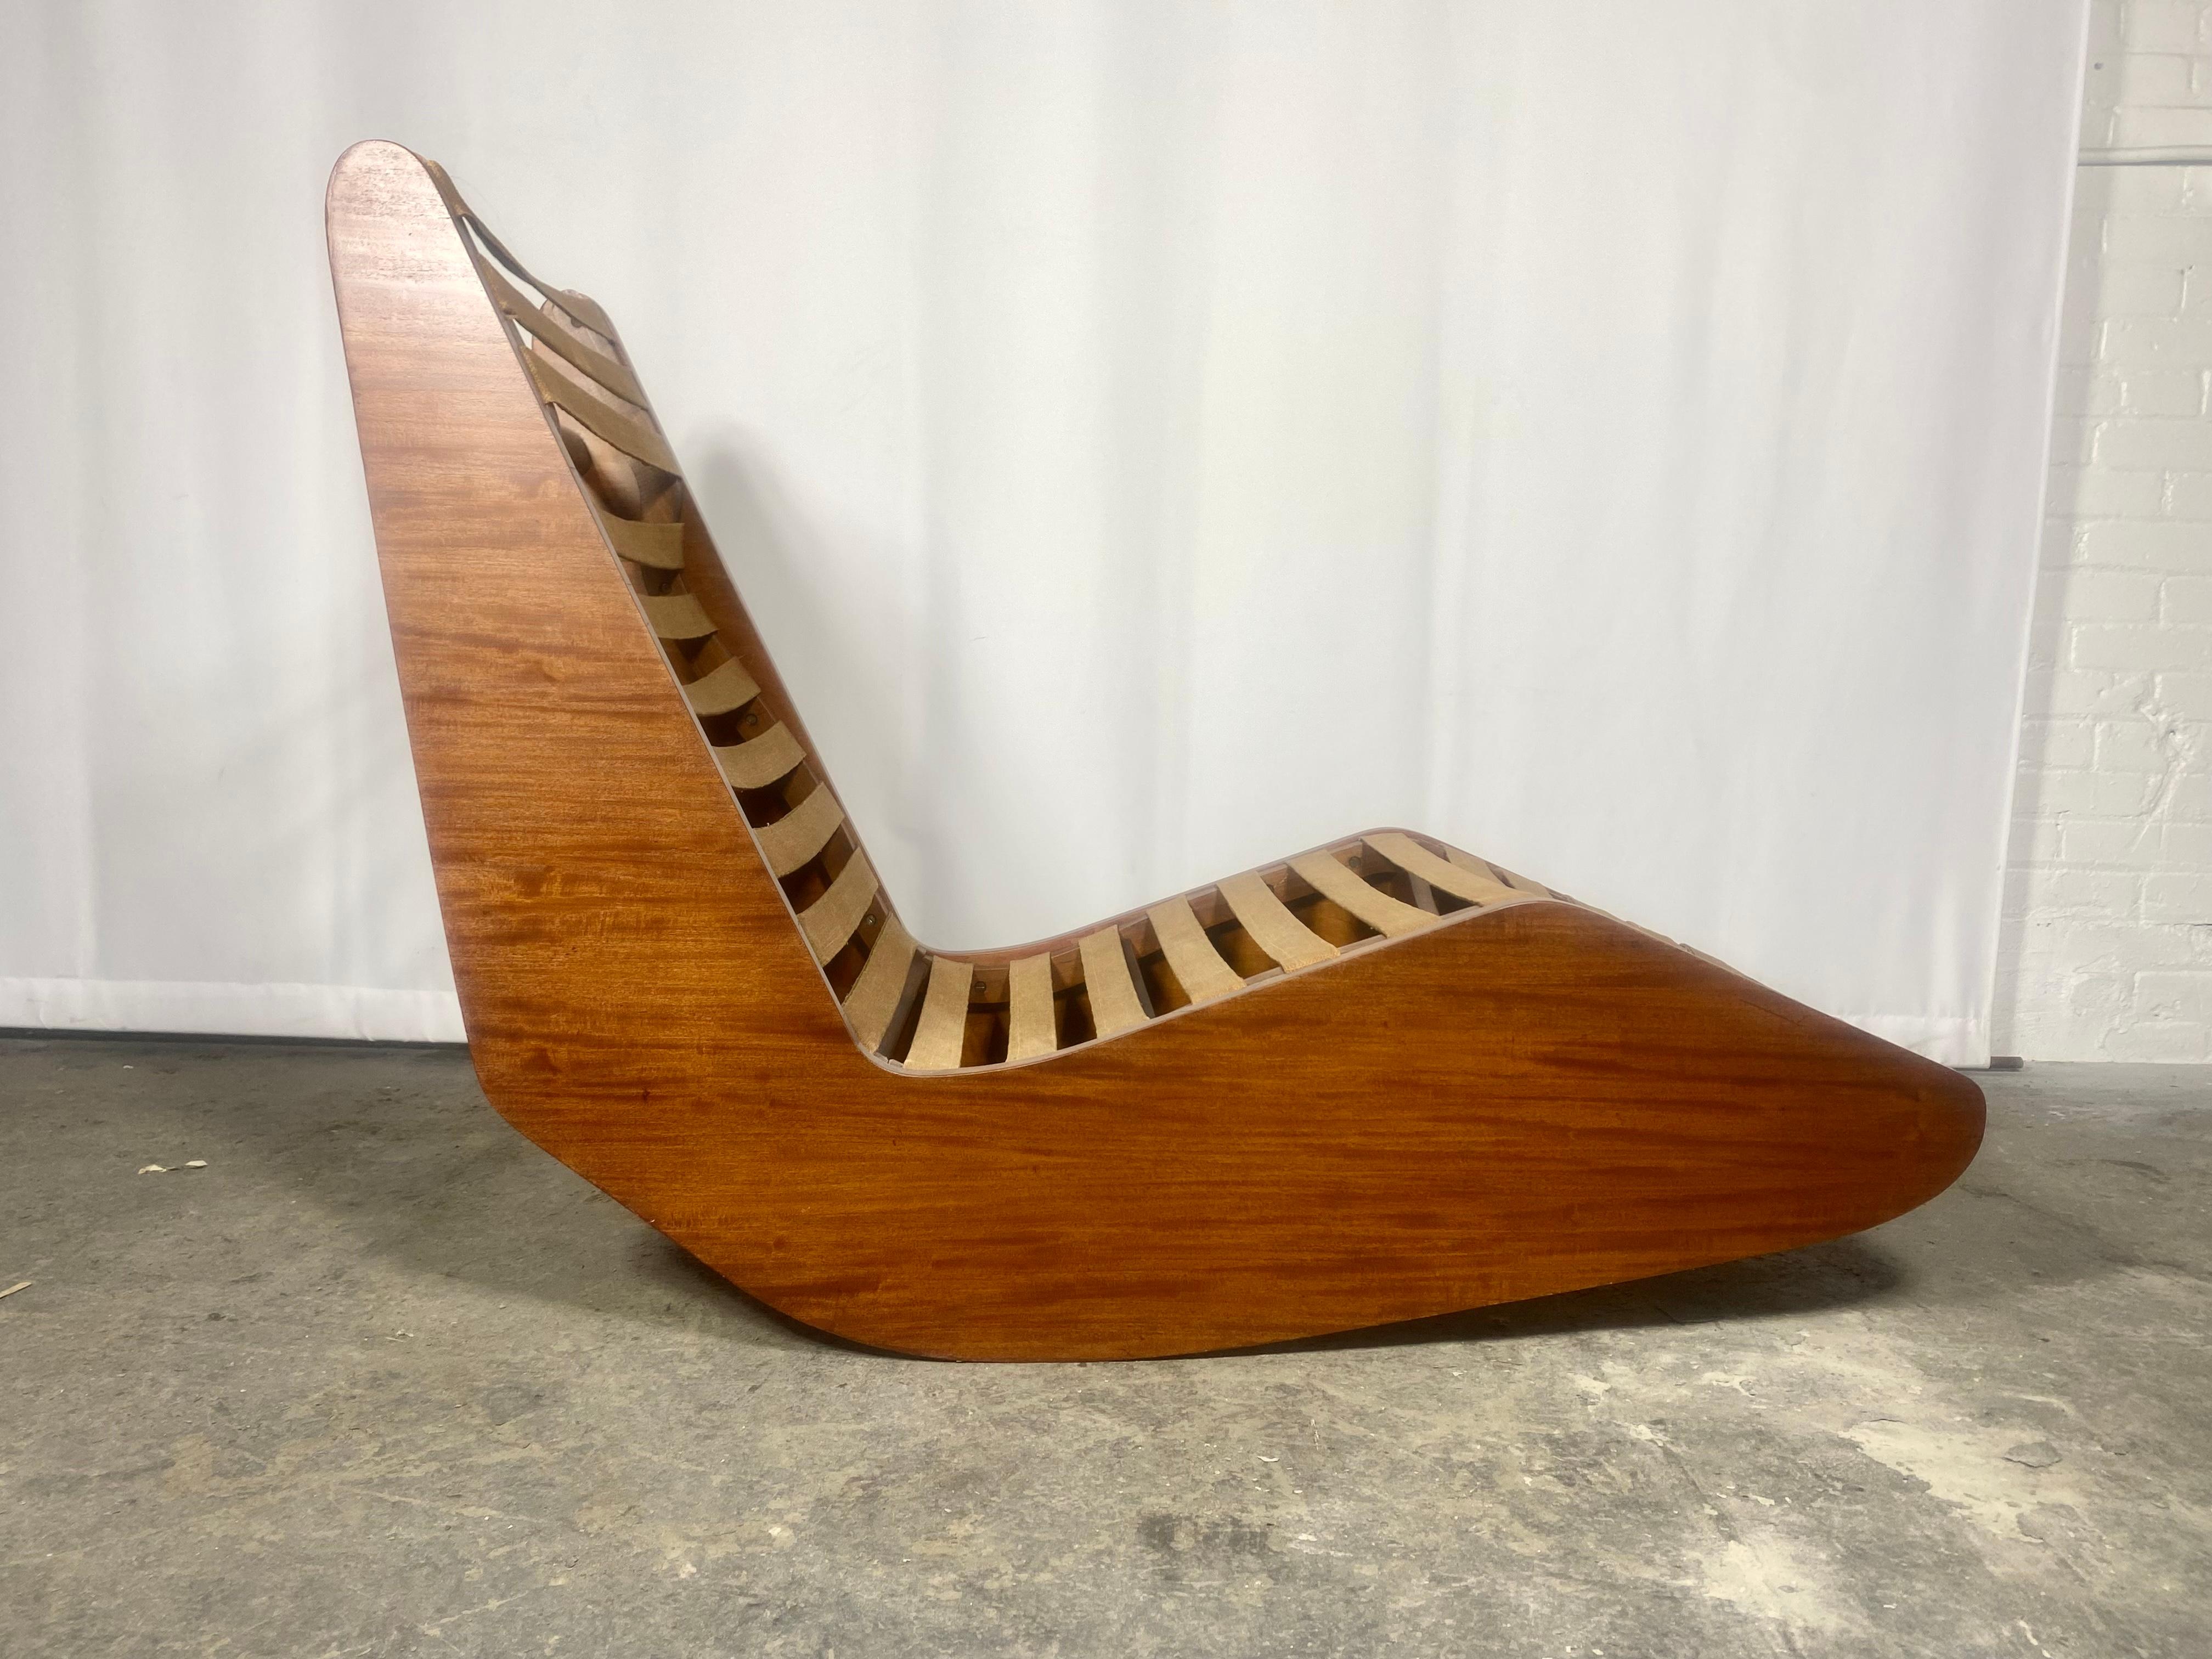 Unusual Modernist interior/ exterior rocking chaise lounge, atrb. to Klaus Grabe In Good Condition For Sale In Buffalo, NY